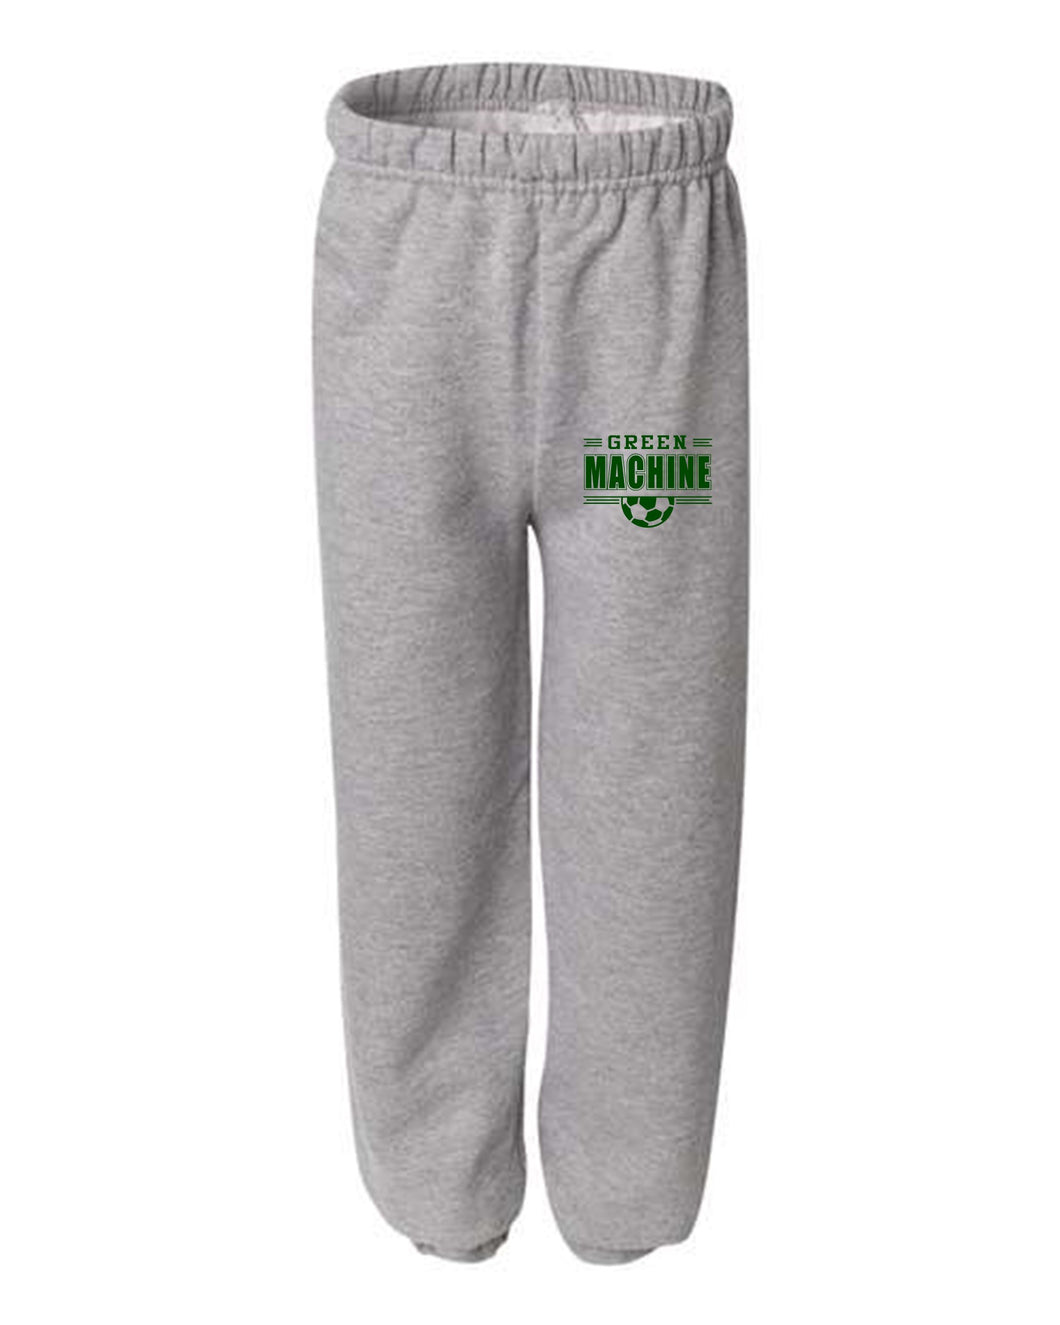 Green Machine Soccer Sweatpants (Youth and Adult)